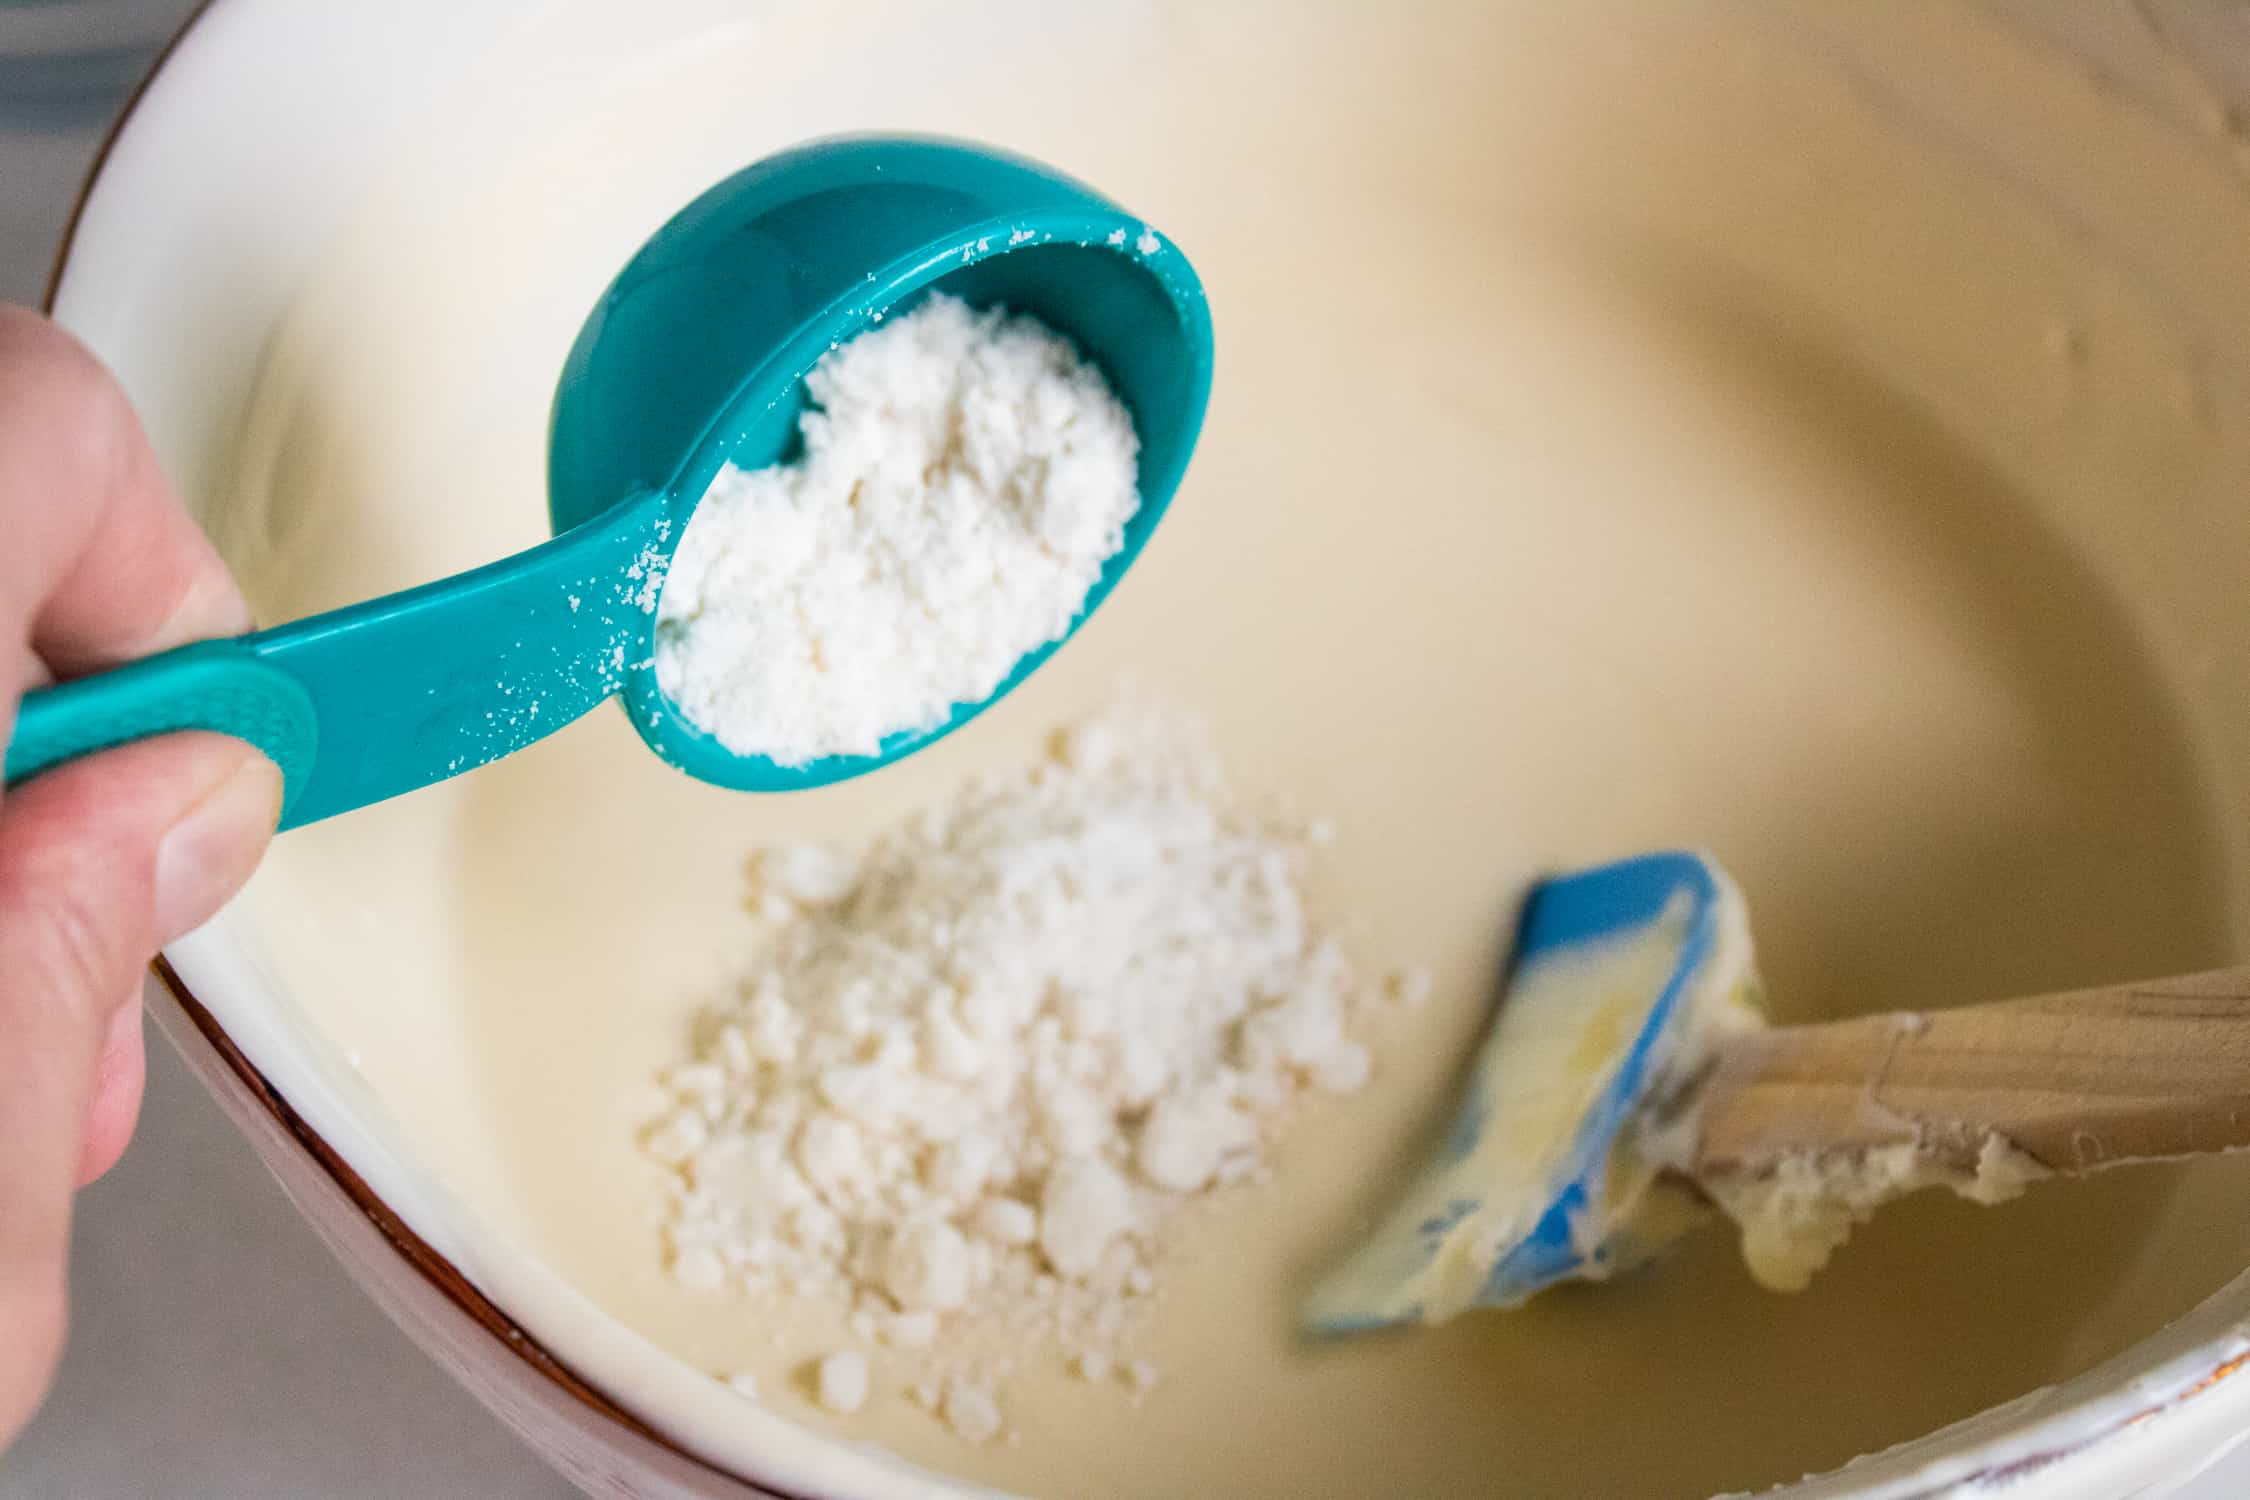 Birthday cake flavoring in a blue measuring spoon being added to the ice cream base in a bowl